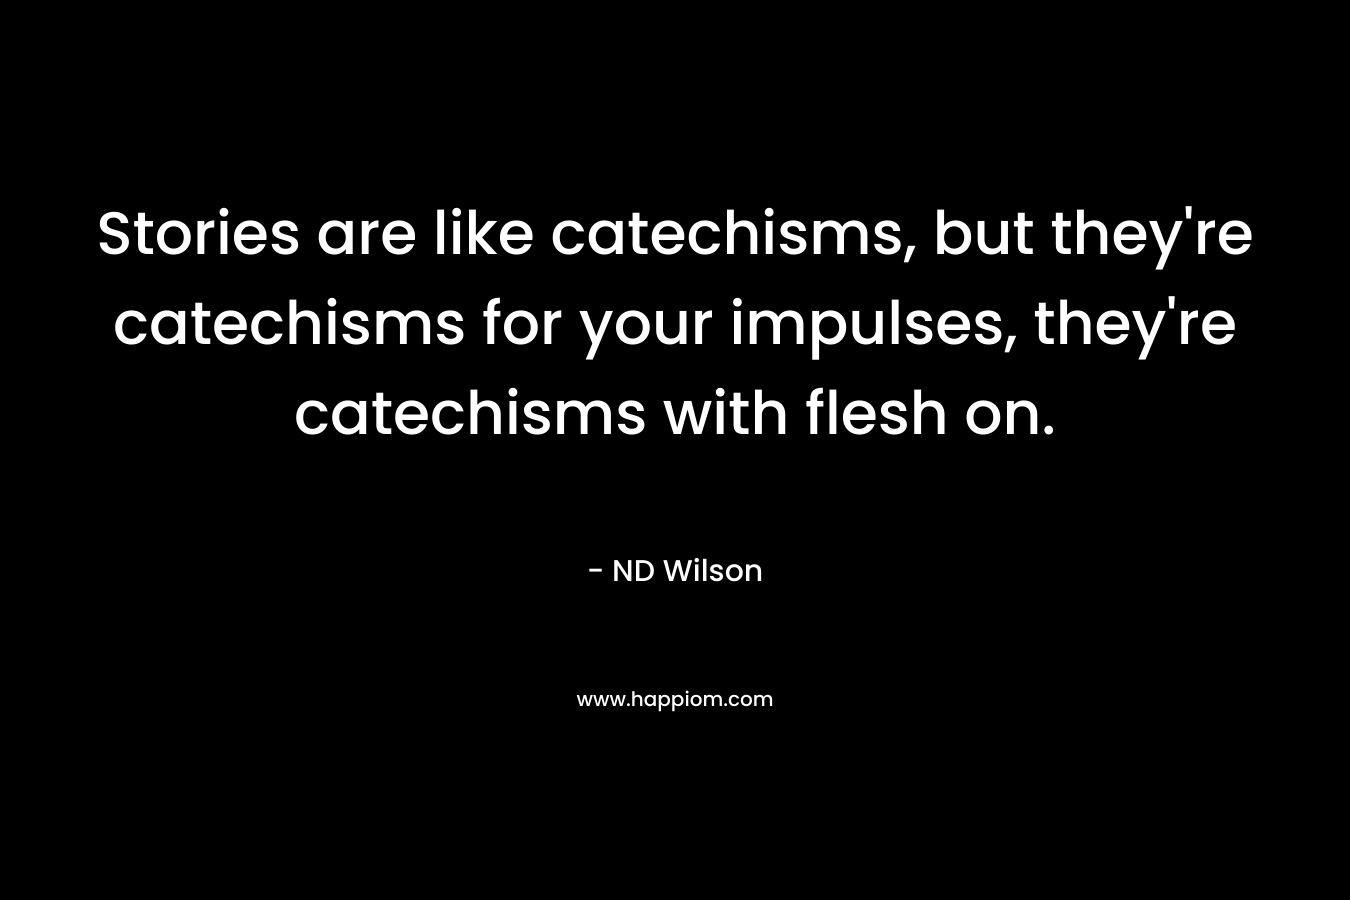 Stories are like catechisms, but they’re catechisms for your impulses, they’re catechisms with flesh on. – ND Wilson